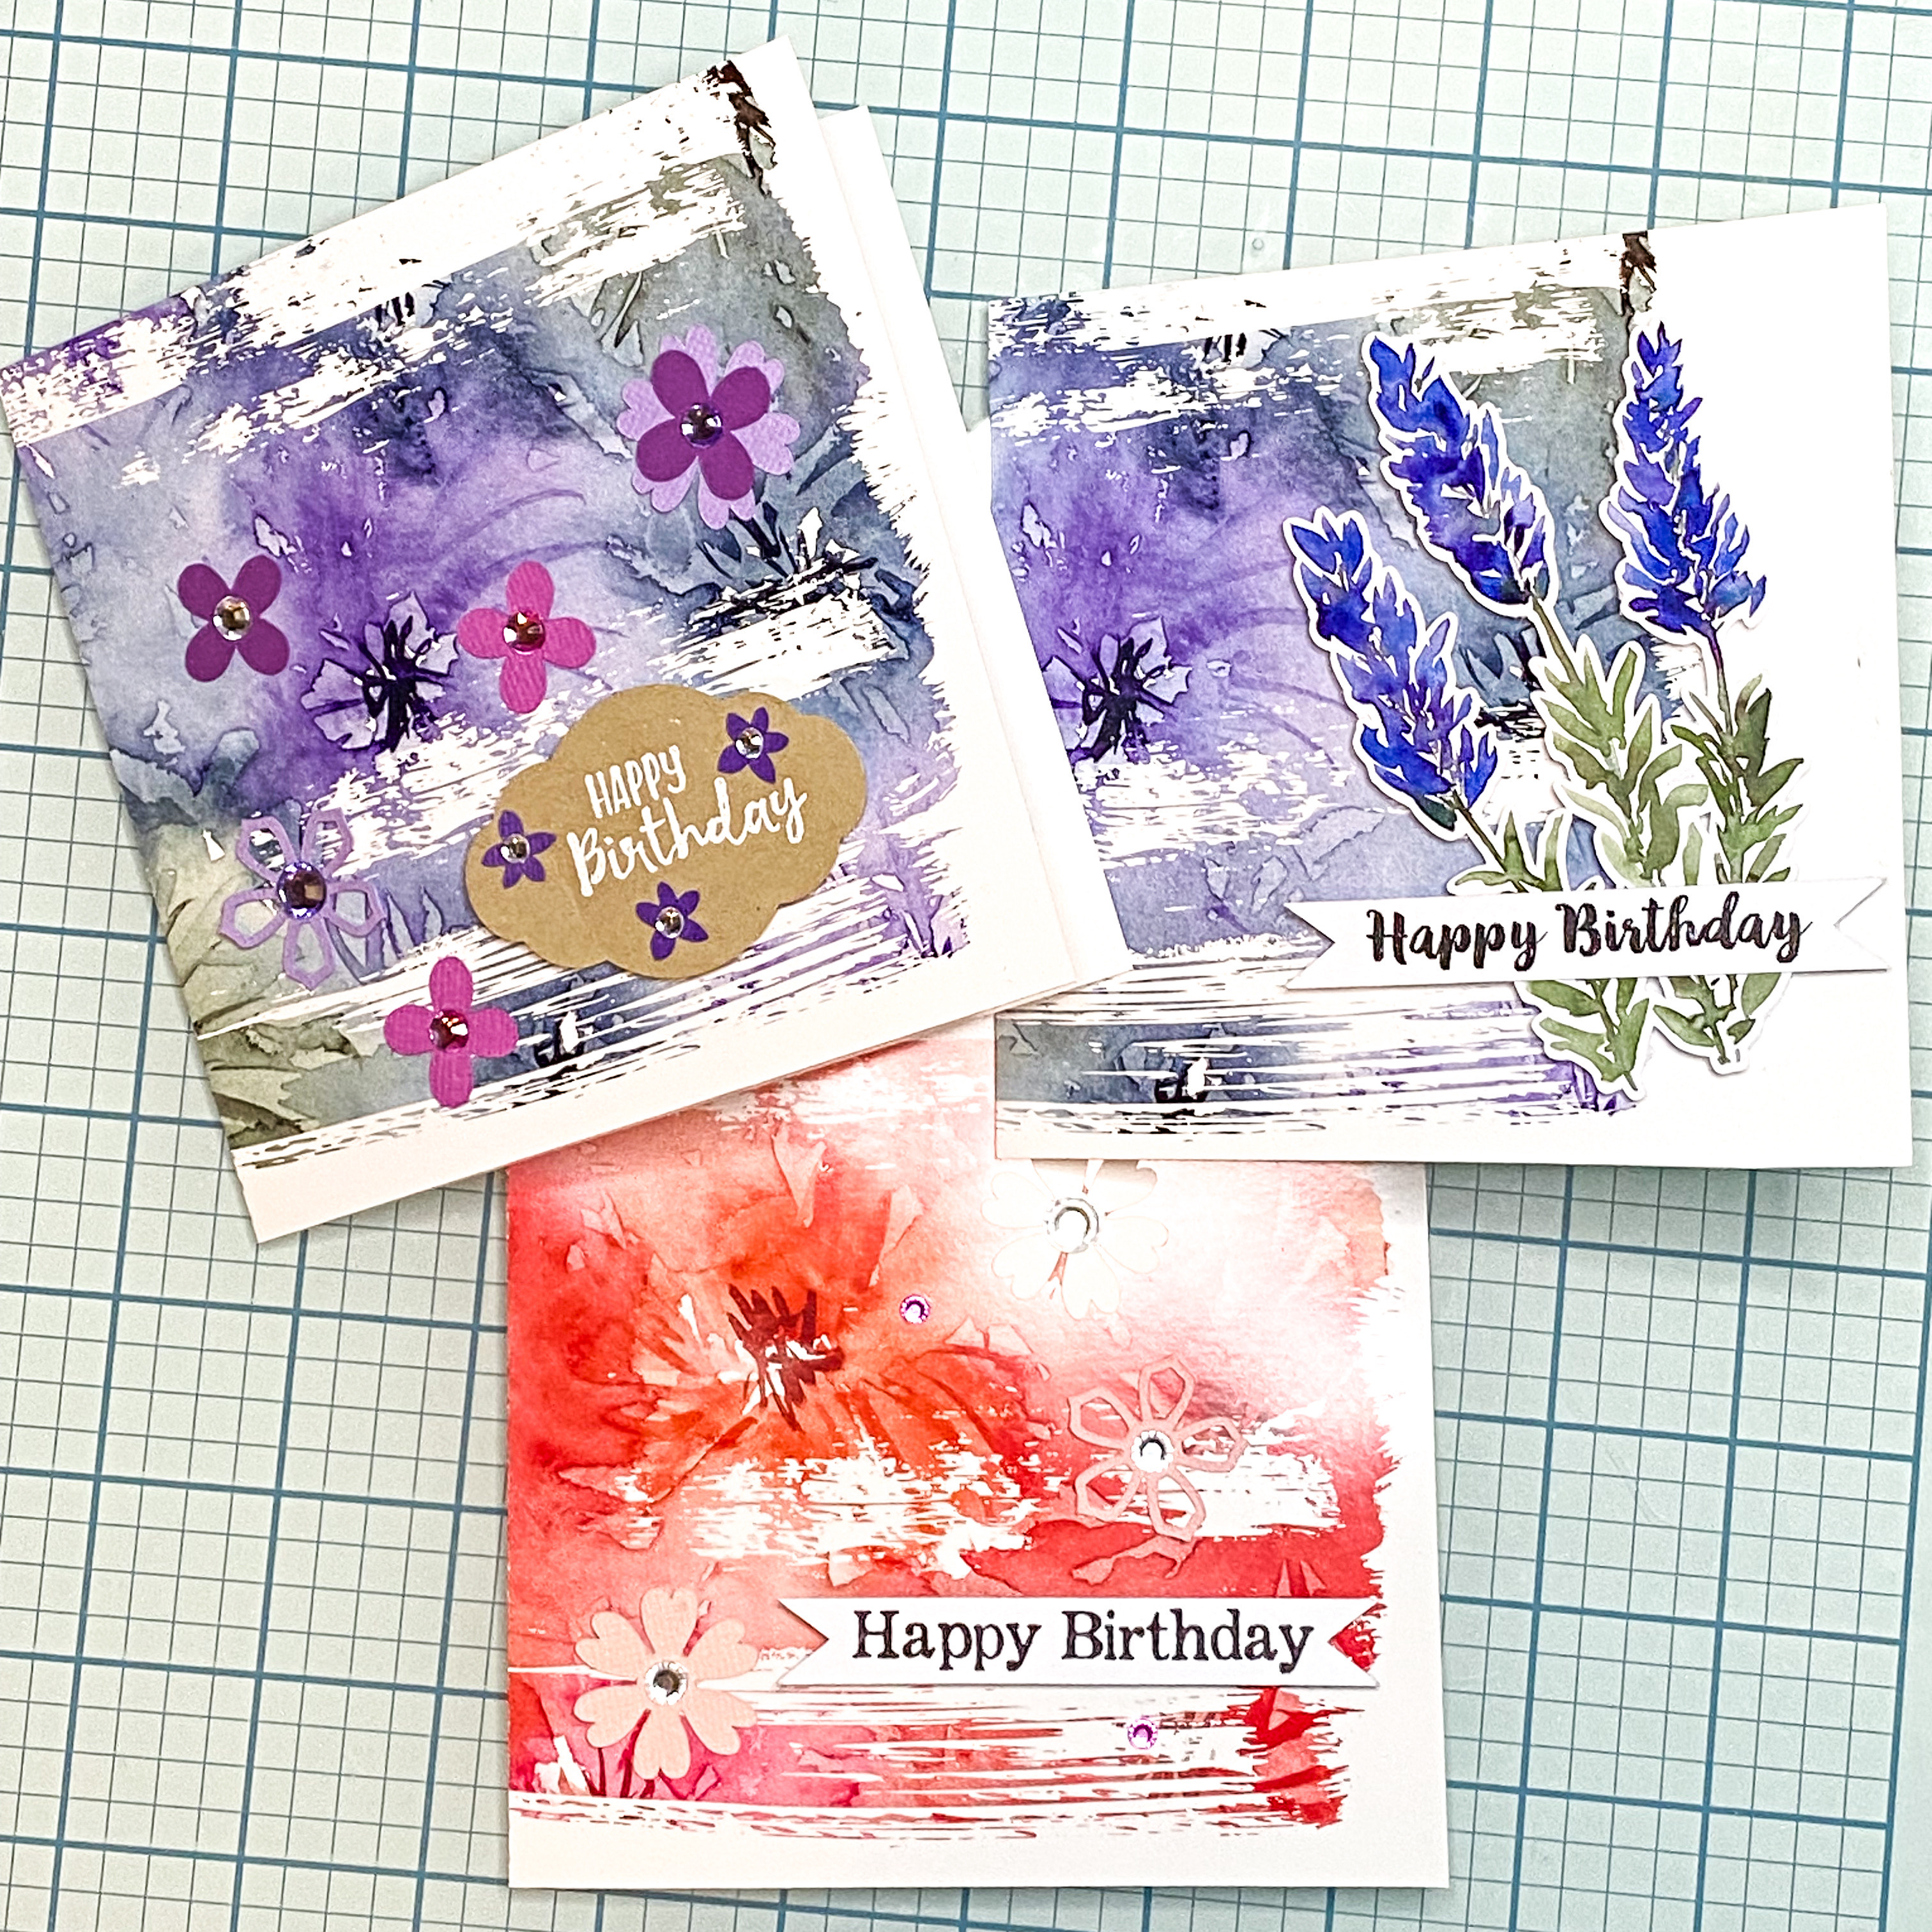 Cards Made with Dry Paint SVG Clipping Mask and Dreamy Watercolor Flowers Backgrounds